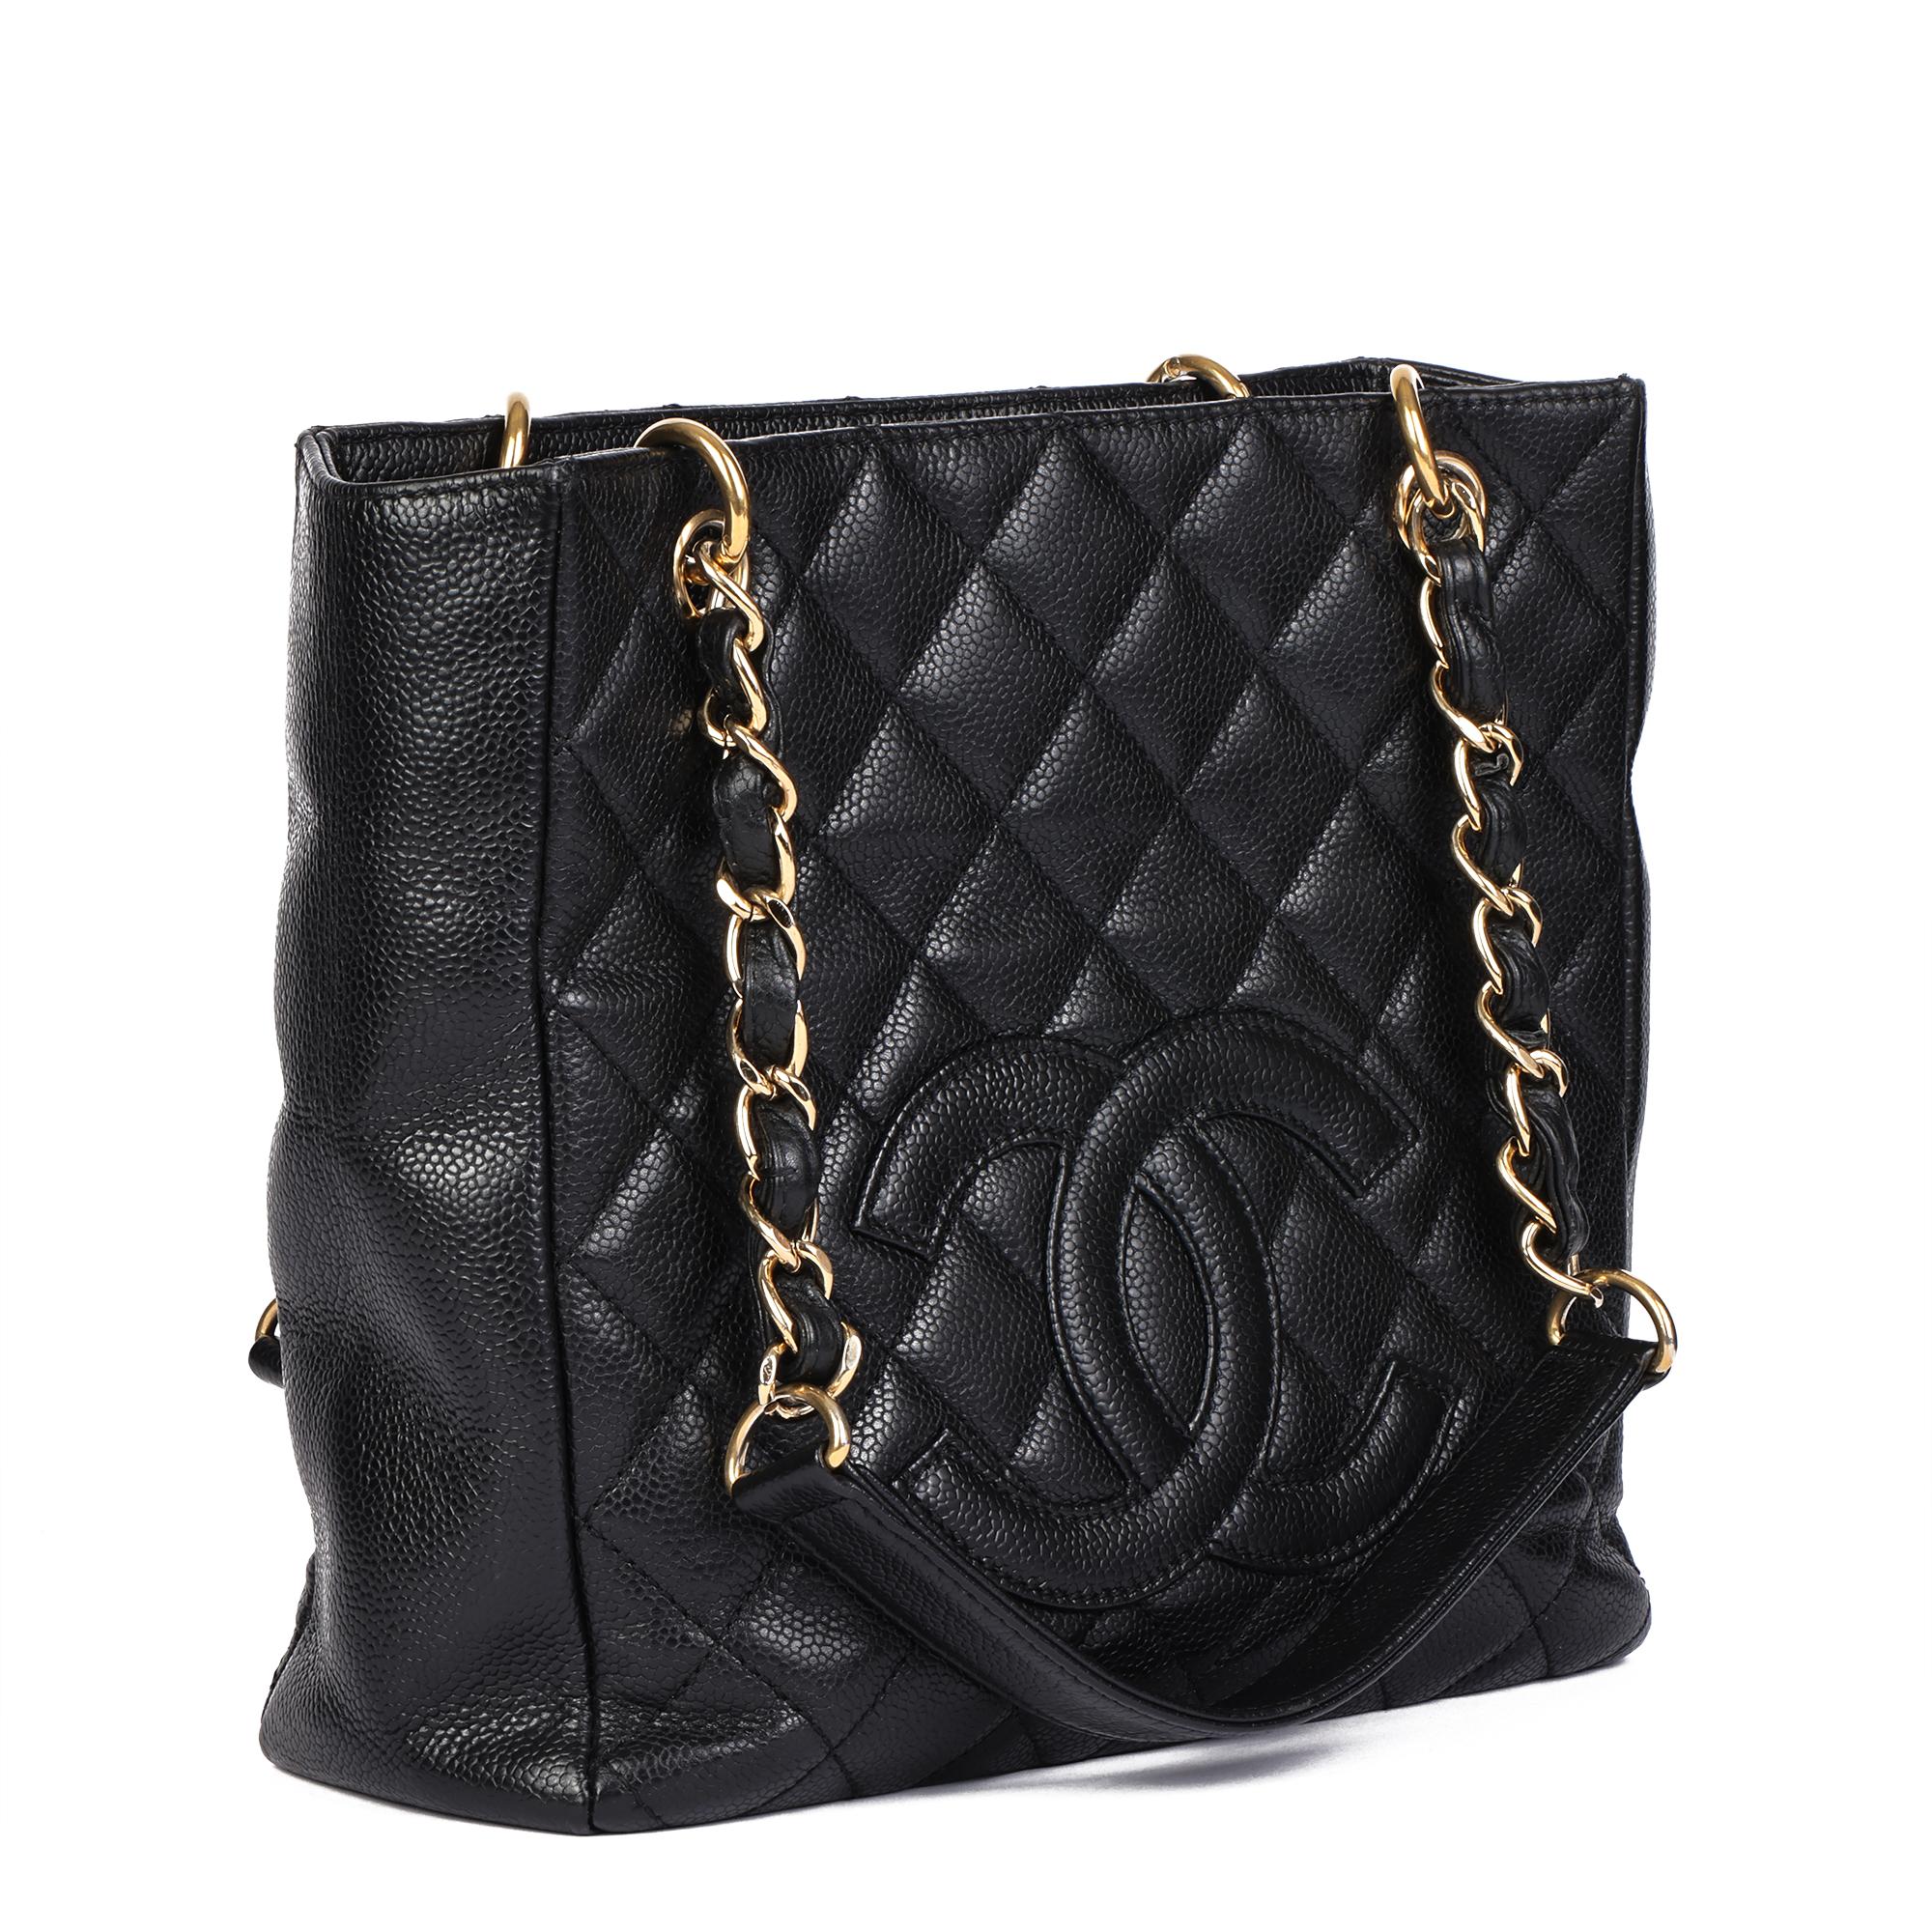 CHANEL
Black Quilted Caviar Leather Petite Shopping Tote PST

Xupes Reference: HB4699
Serial Number: 11949032
Age (Circa): 2006
Accompanied By: Chanel Box, Authenticity Card
Authenticity Details: Authenticity Card, Serial Sticker (Made in